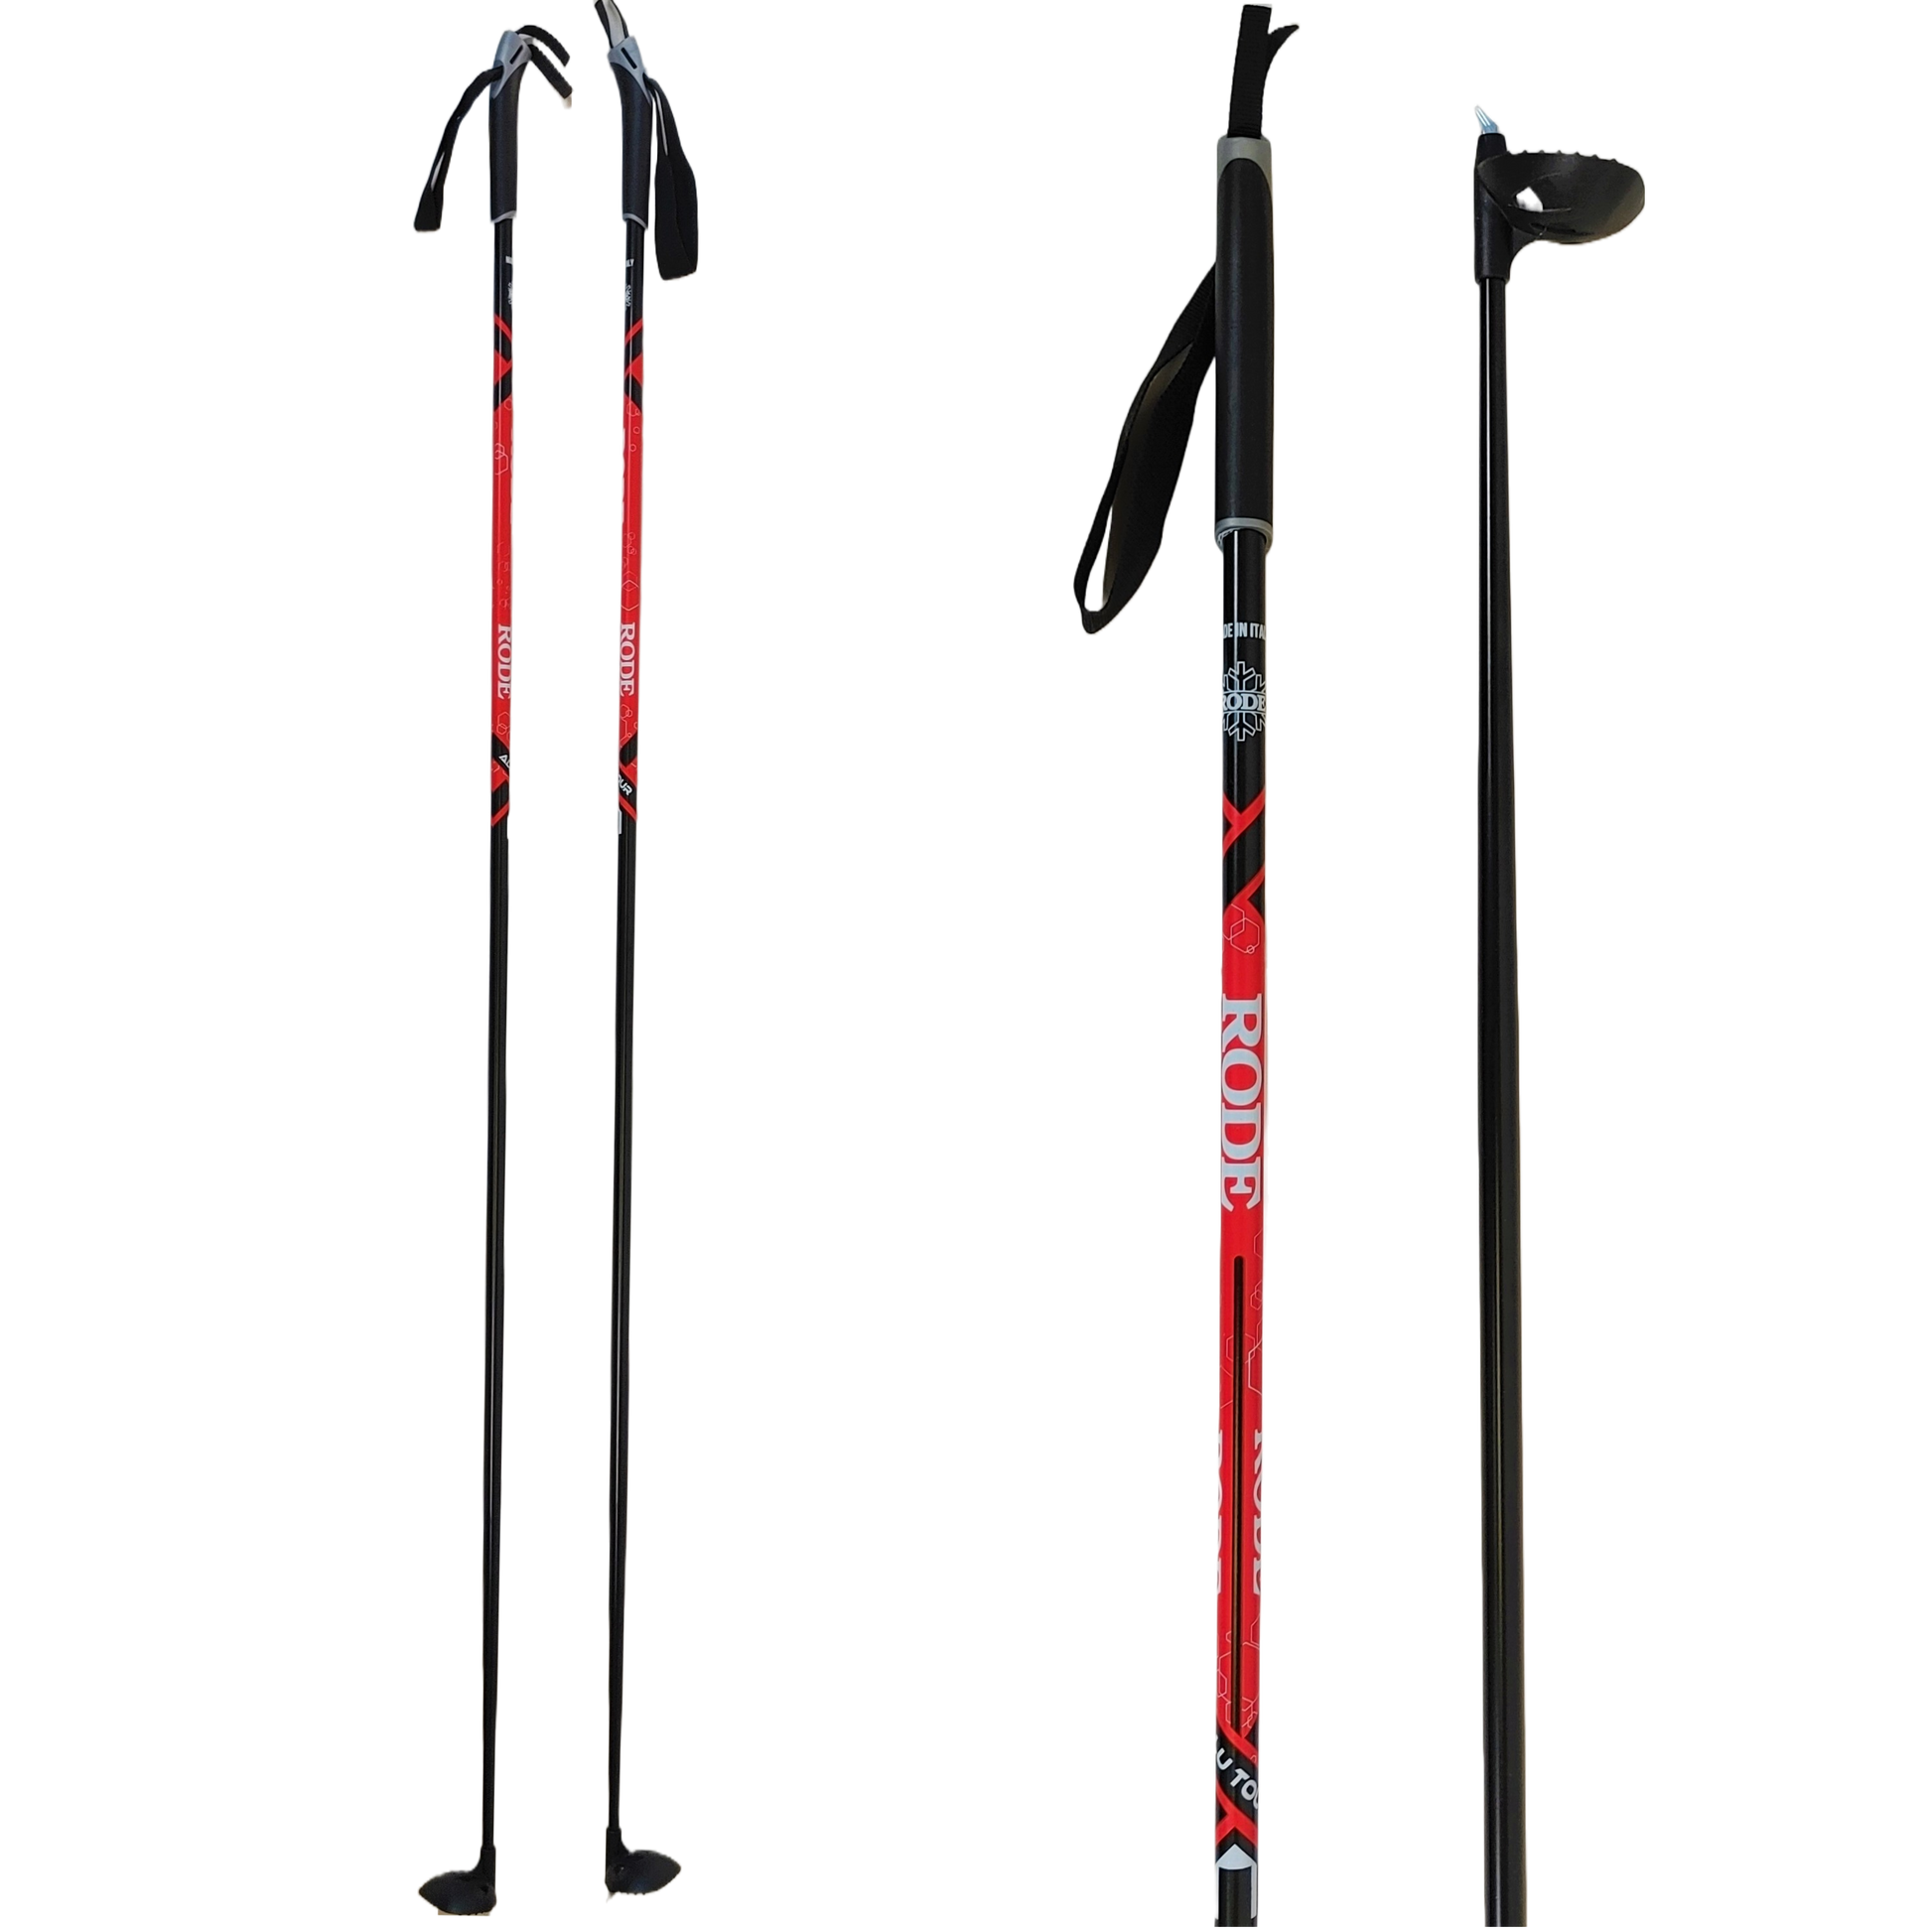 A product picture of the Rode Alu Tour Poles